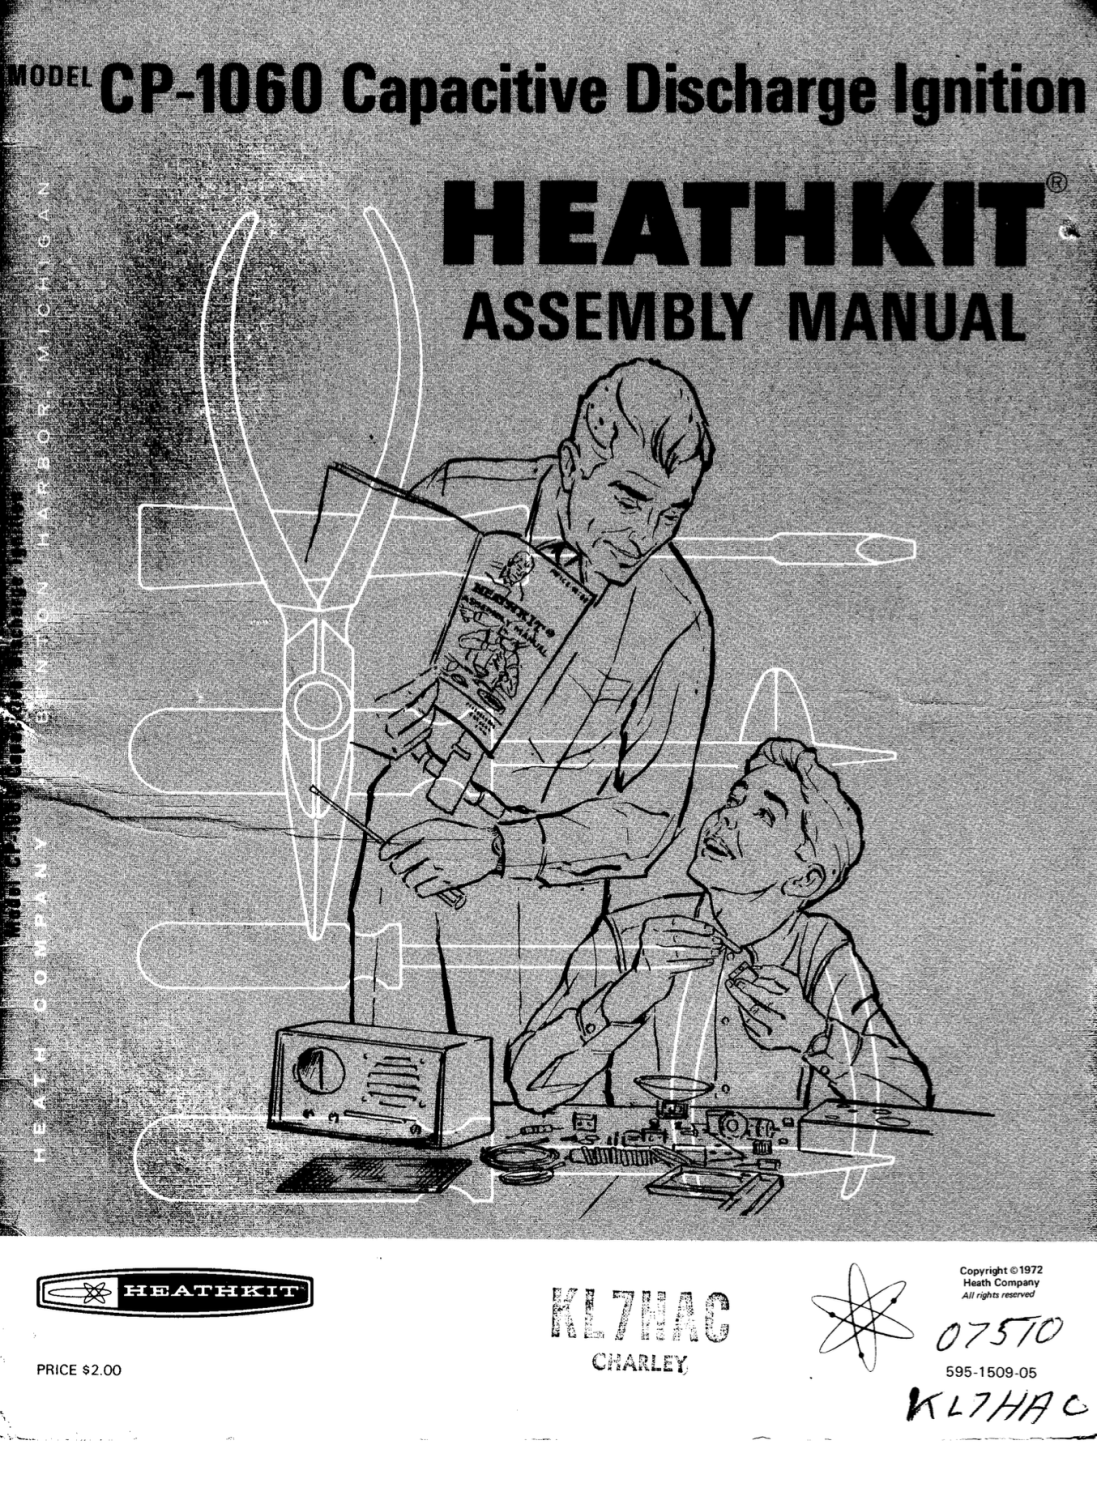 Heathkit CP-1060 Capacitive Discharge Ignition - Assembly Manual